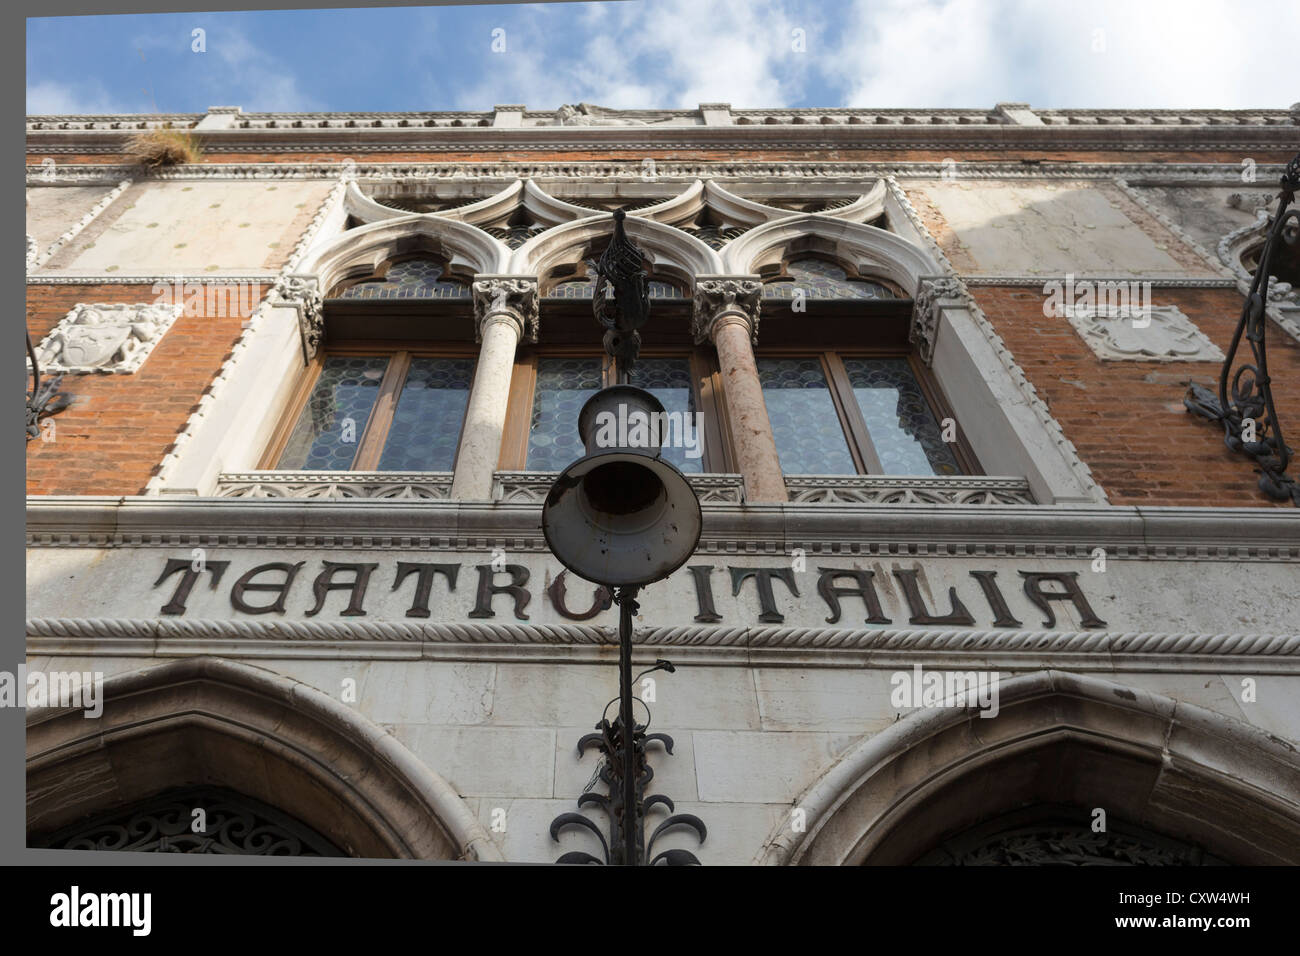 Facade of the Teatro Italia (Italian Theatre) in Venice, showing typical Gothic architecture and wrought-iron lettering Stock Photo